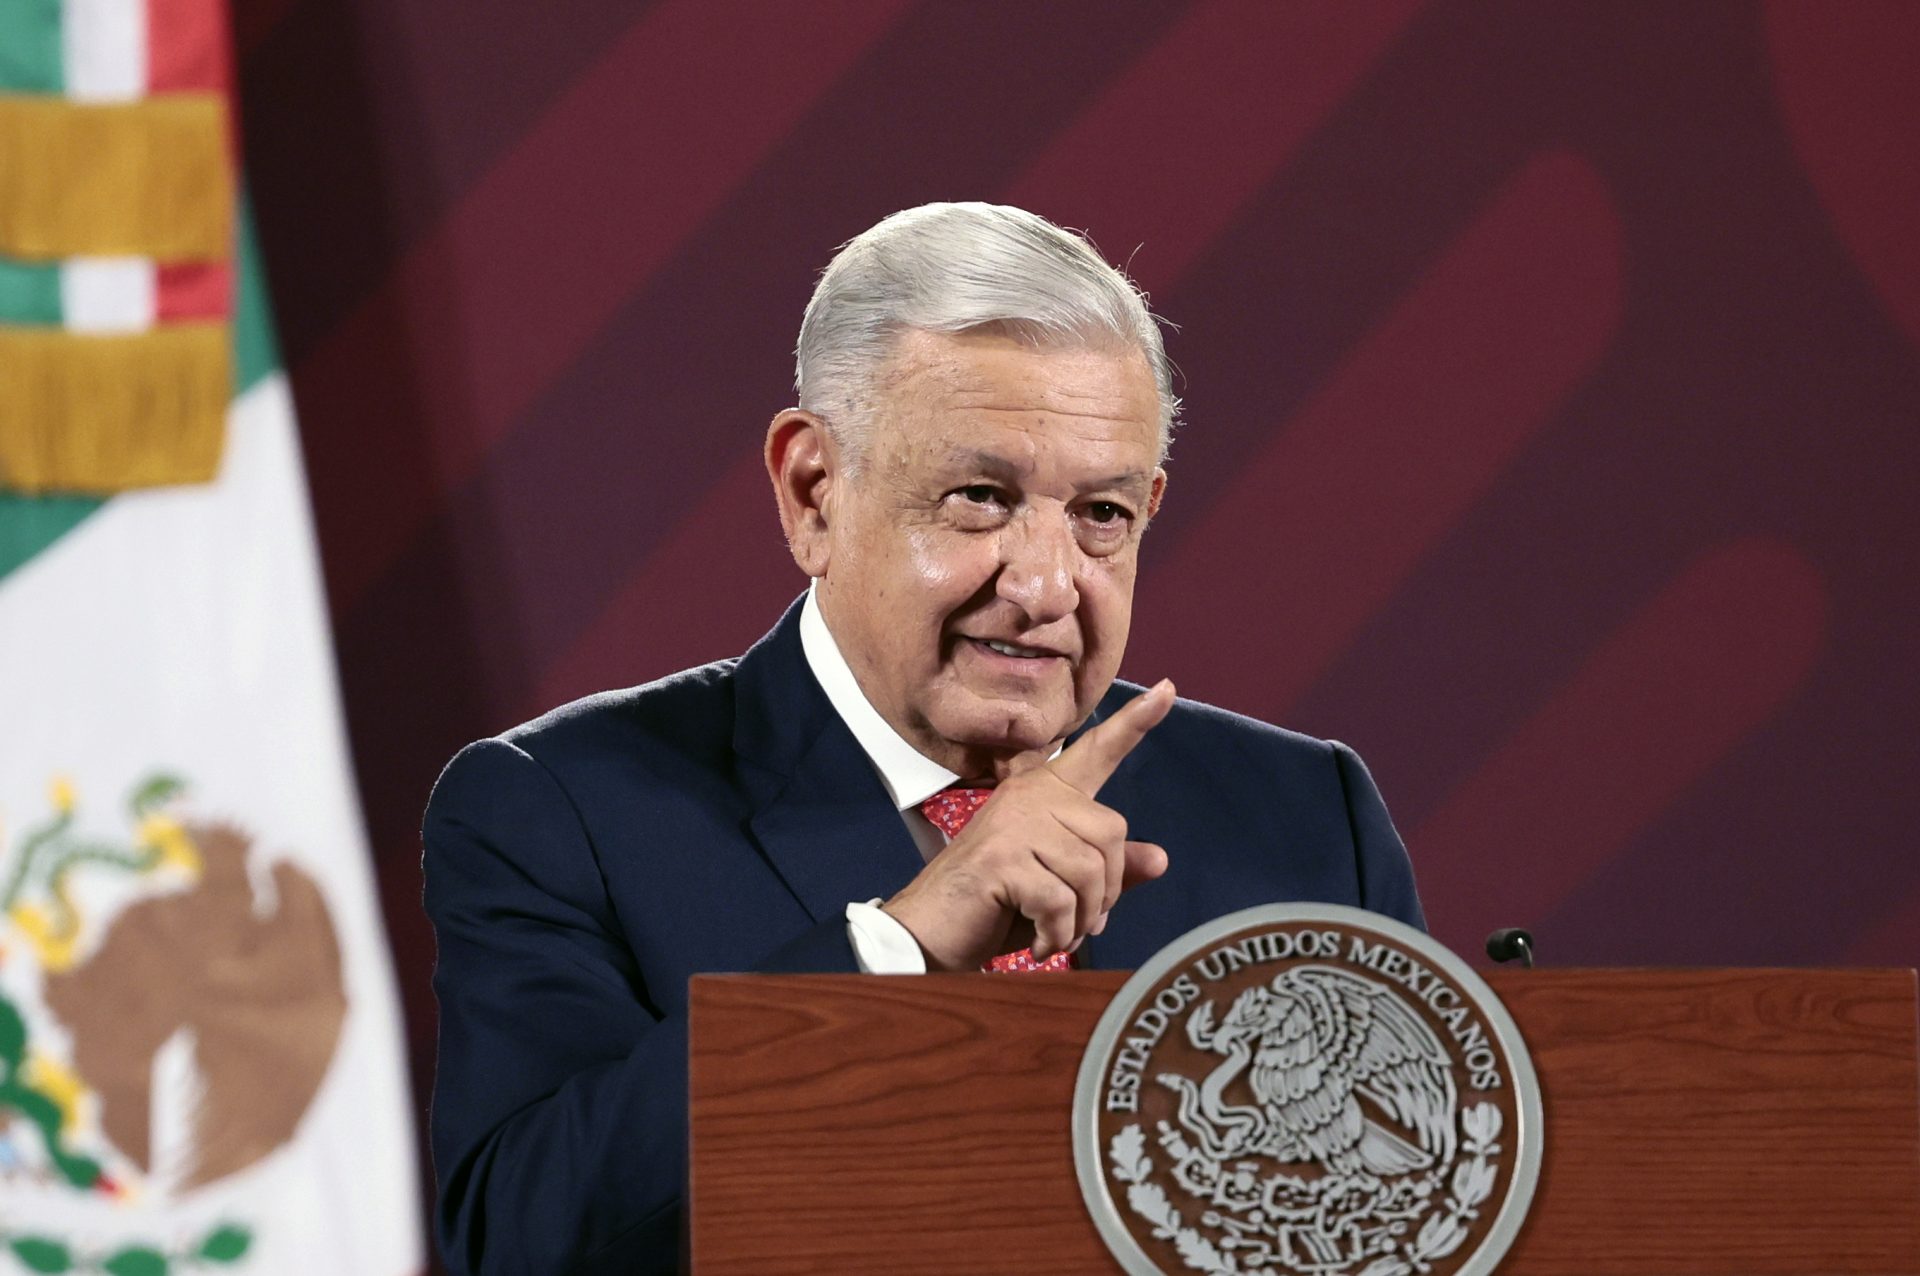 The President of Mexico, Andrés Manuel López Obrador, speaks during his morning press conference today, at the National Palace in Mexico City, Mexico.  BLAZETRENDS/Jose Mendez